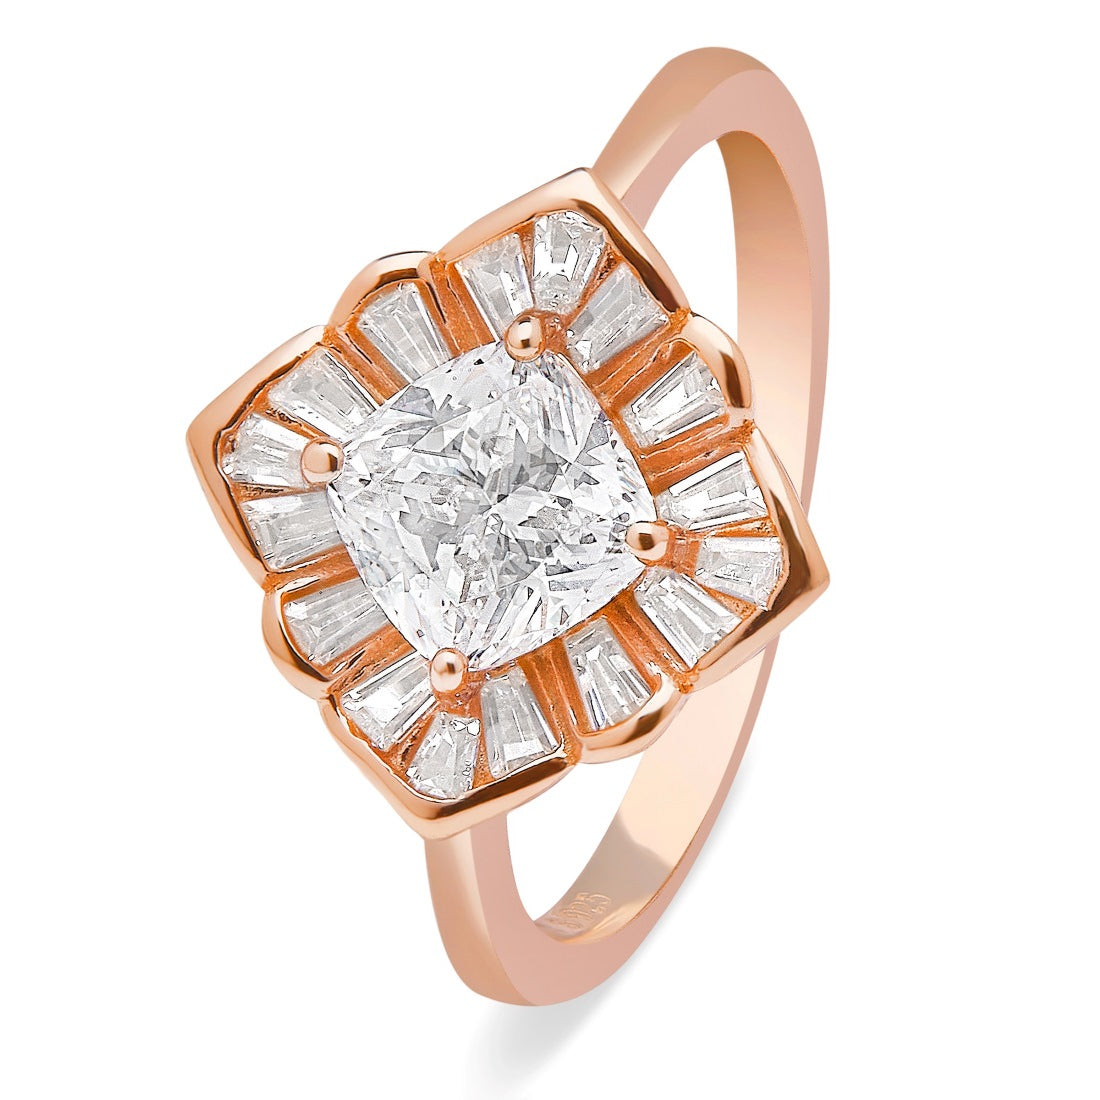 Radiant Rose Square 925 Sterling Silver Rose Gold-Plated Women's Ring (Onesize)